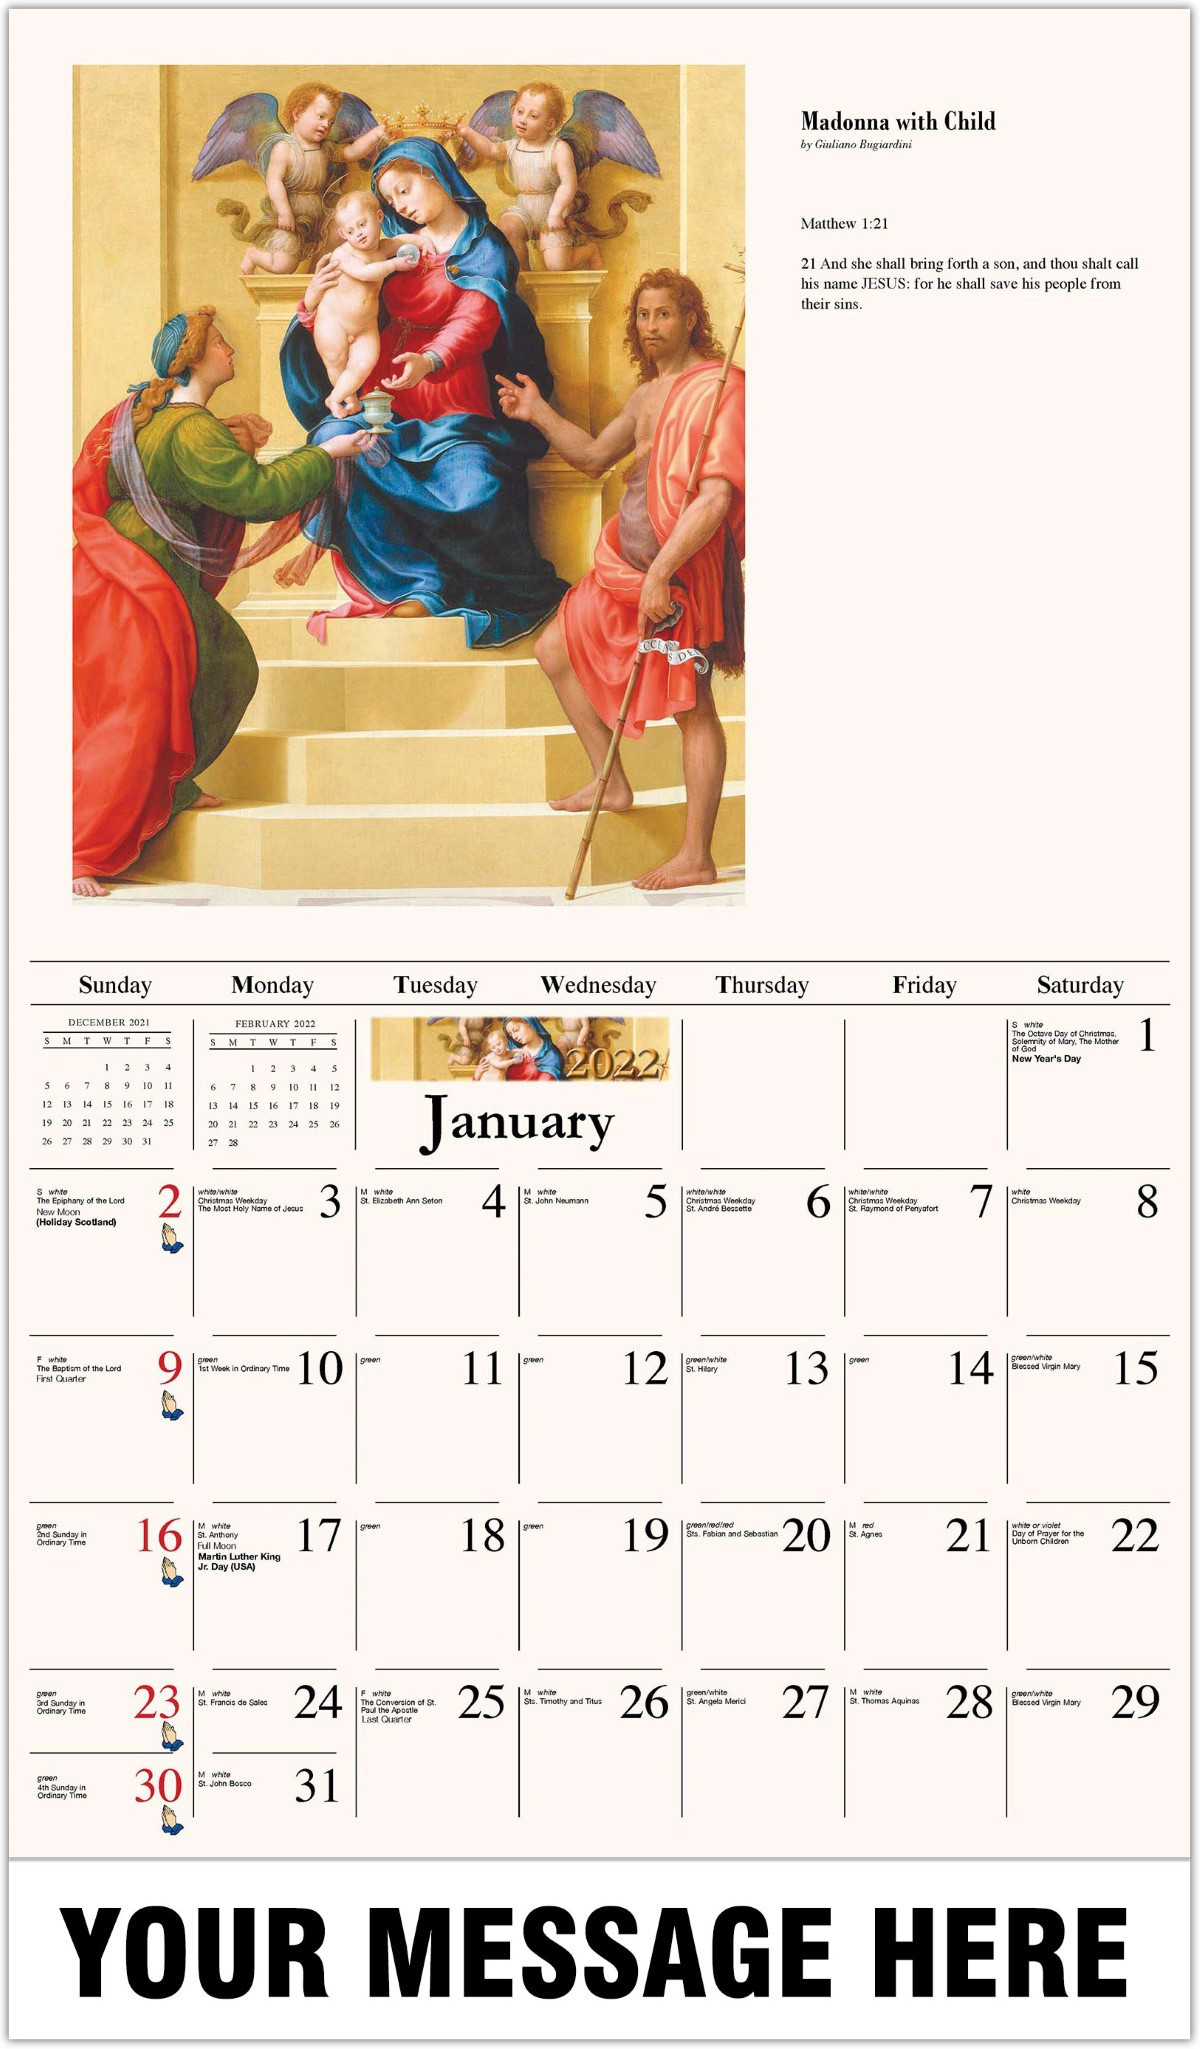 Catholic Inspirations - 2022 Promotional Calendar  Astronomy Picture Of The Day Calendar December 2022